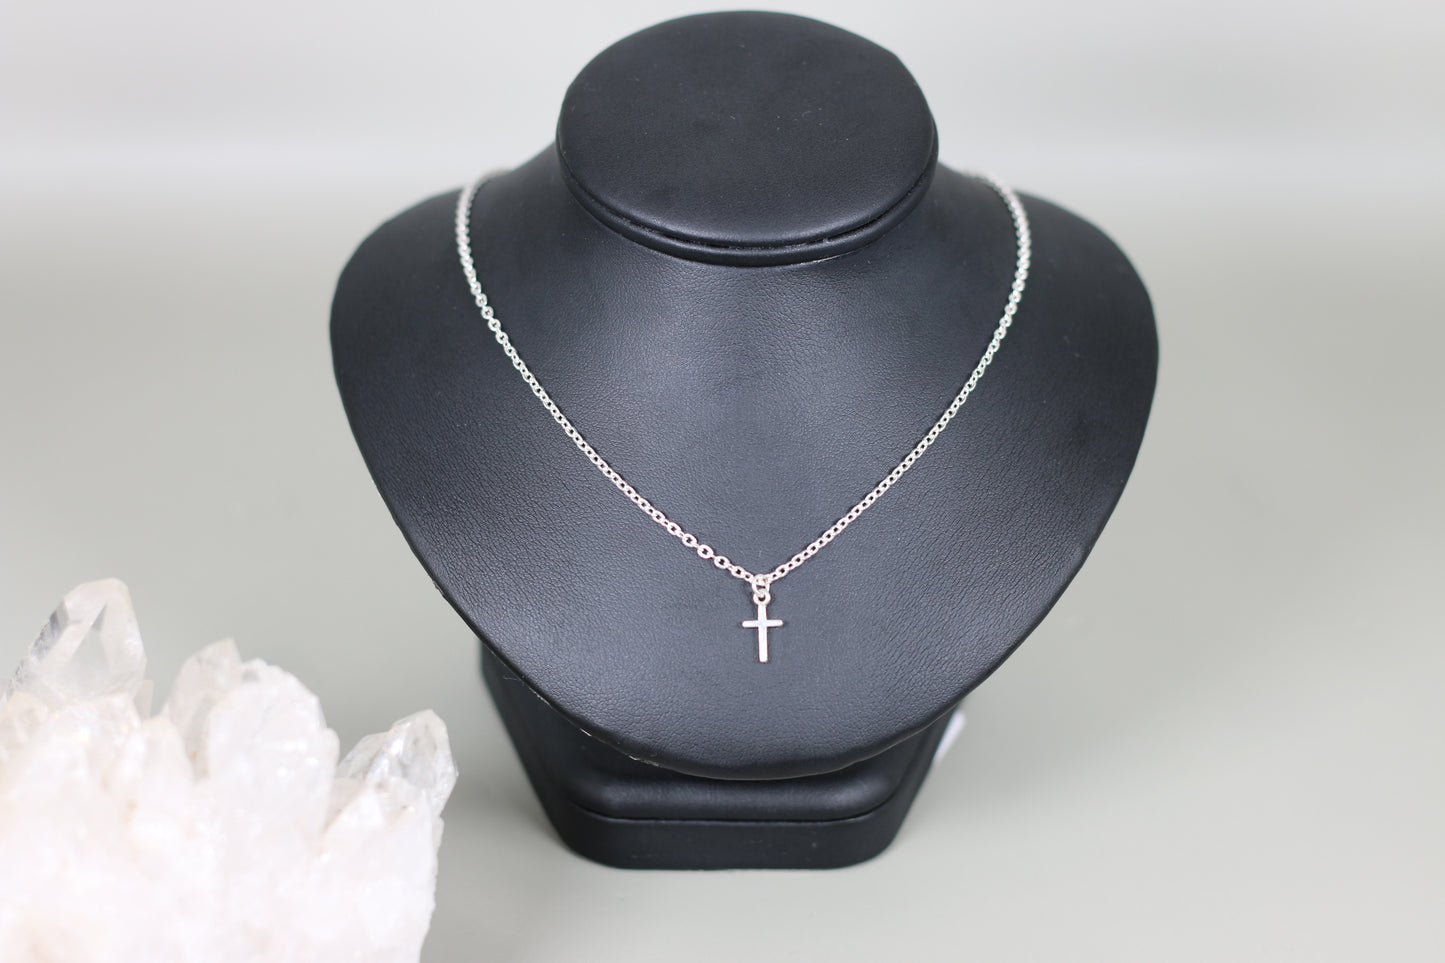 Cross Sterling Silver Pendant 16" Flat Cable Necklace with Sterling Silver Components